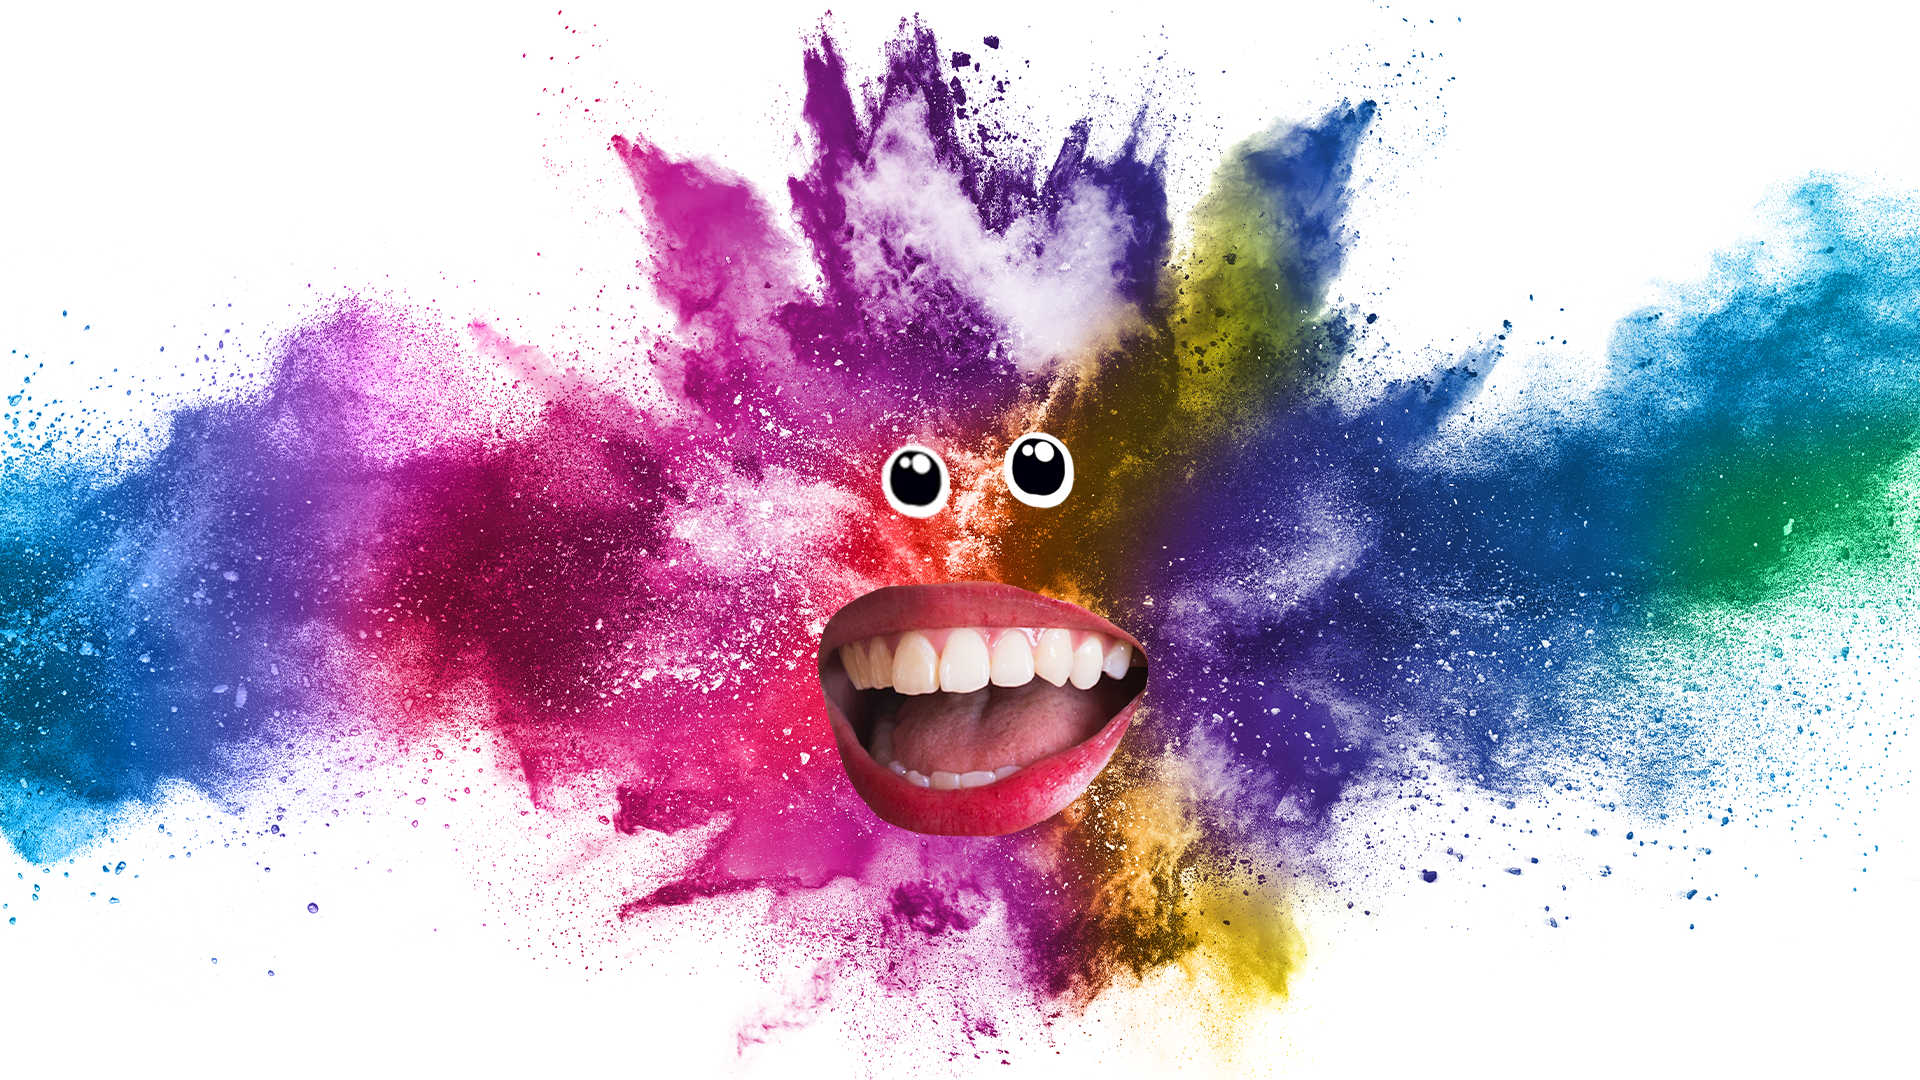 Burst of colour with eyes and mouth